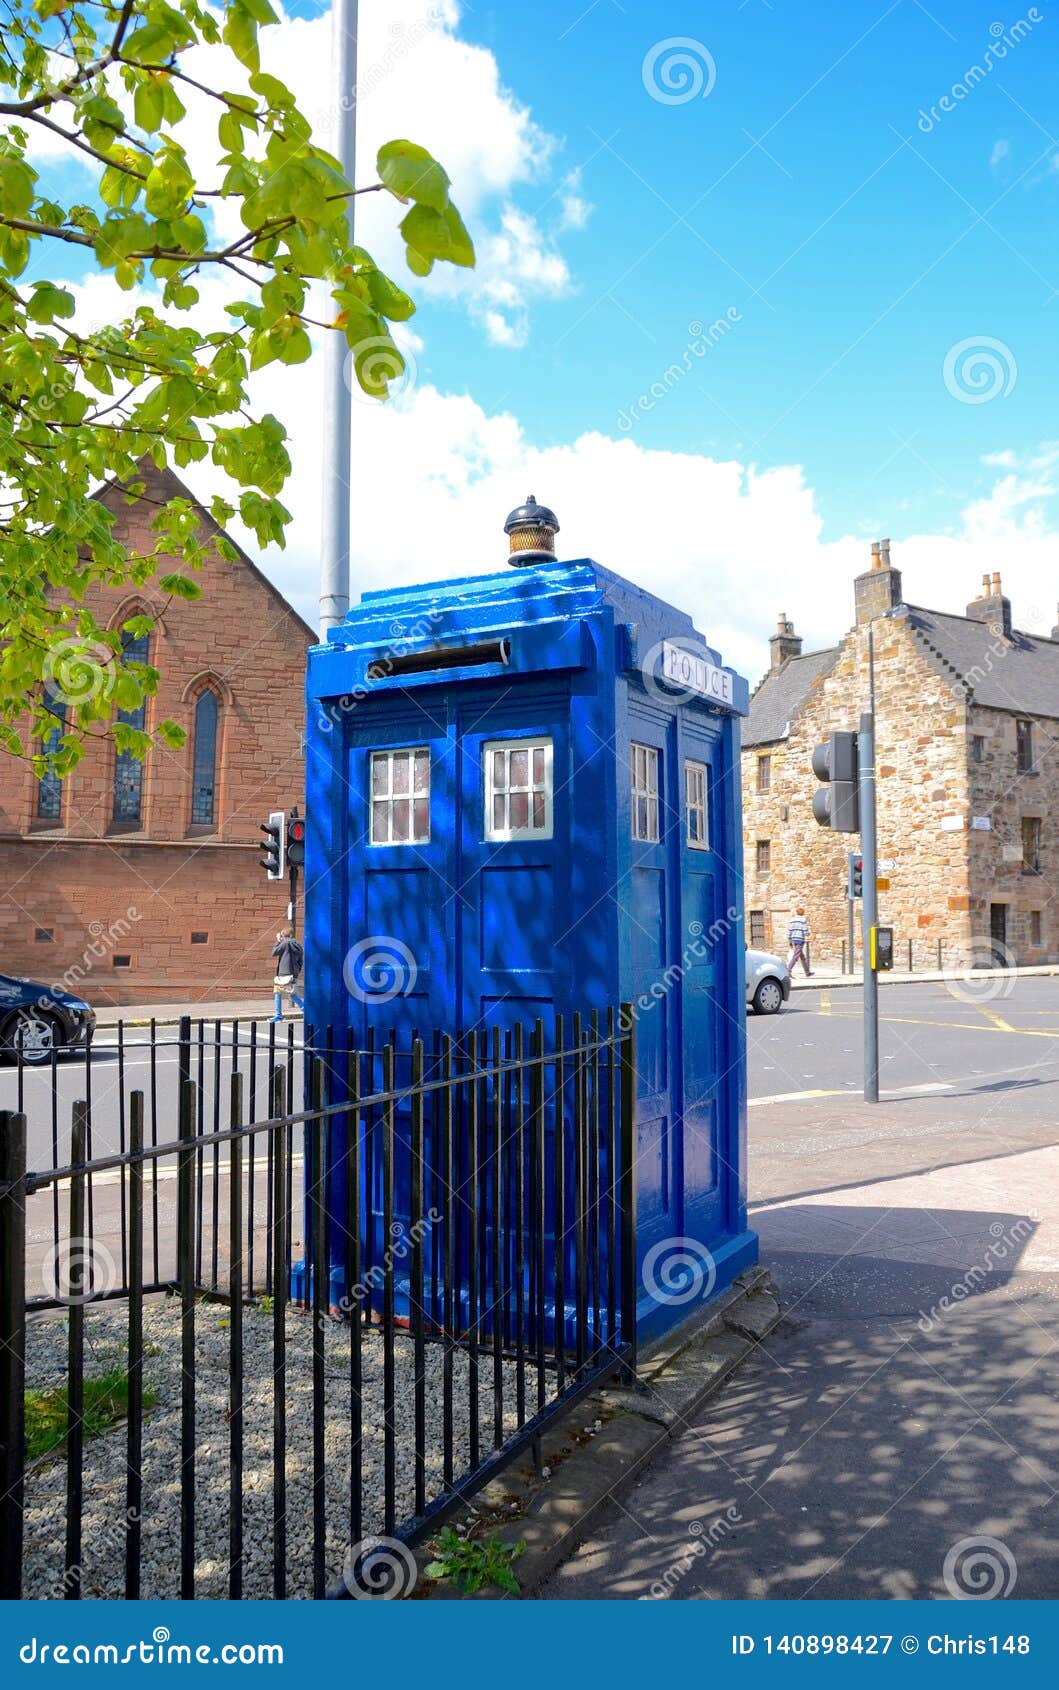 Police Box, Cathedral Square, Glasgow Stock Image - Image of doctor ...